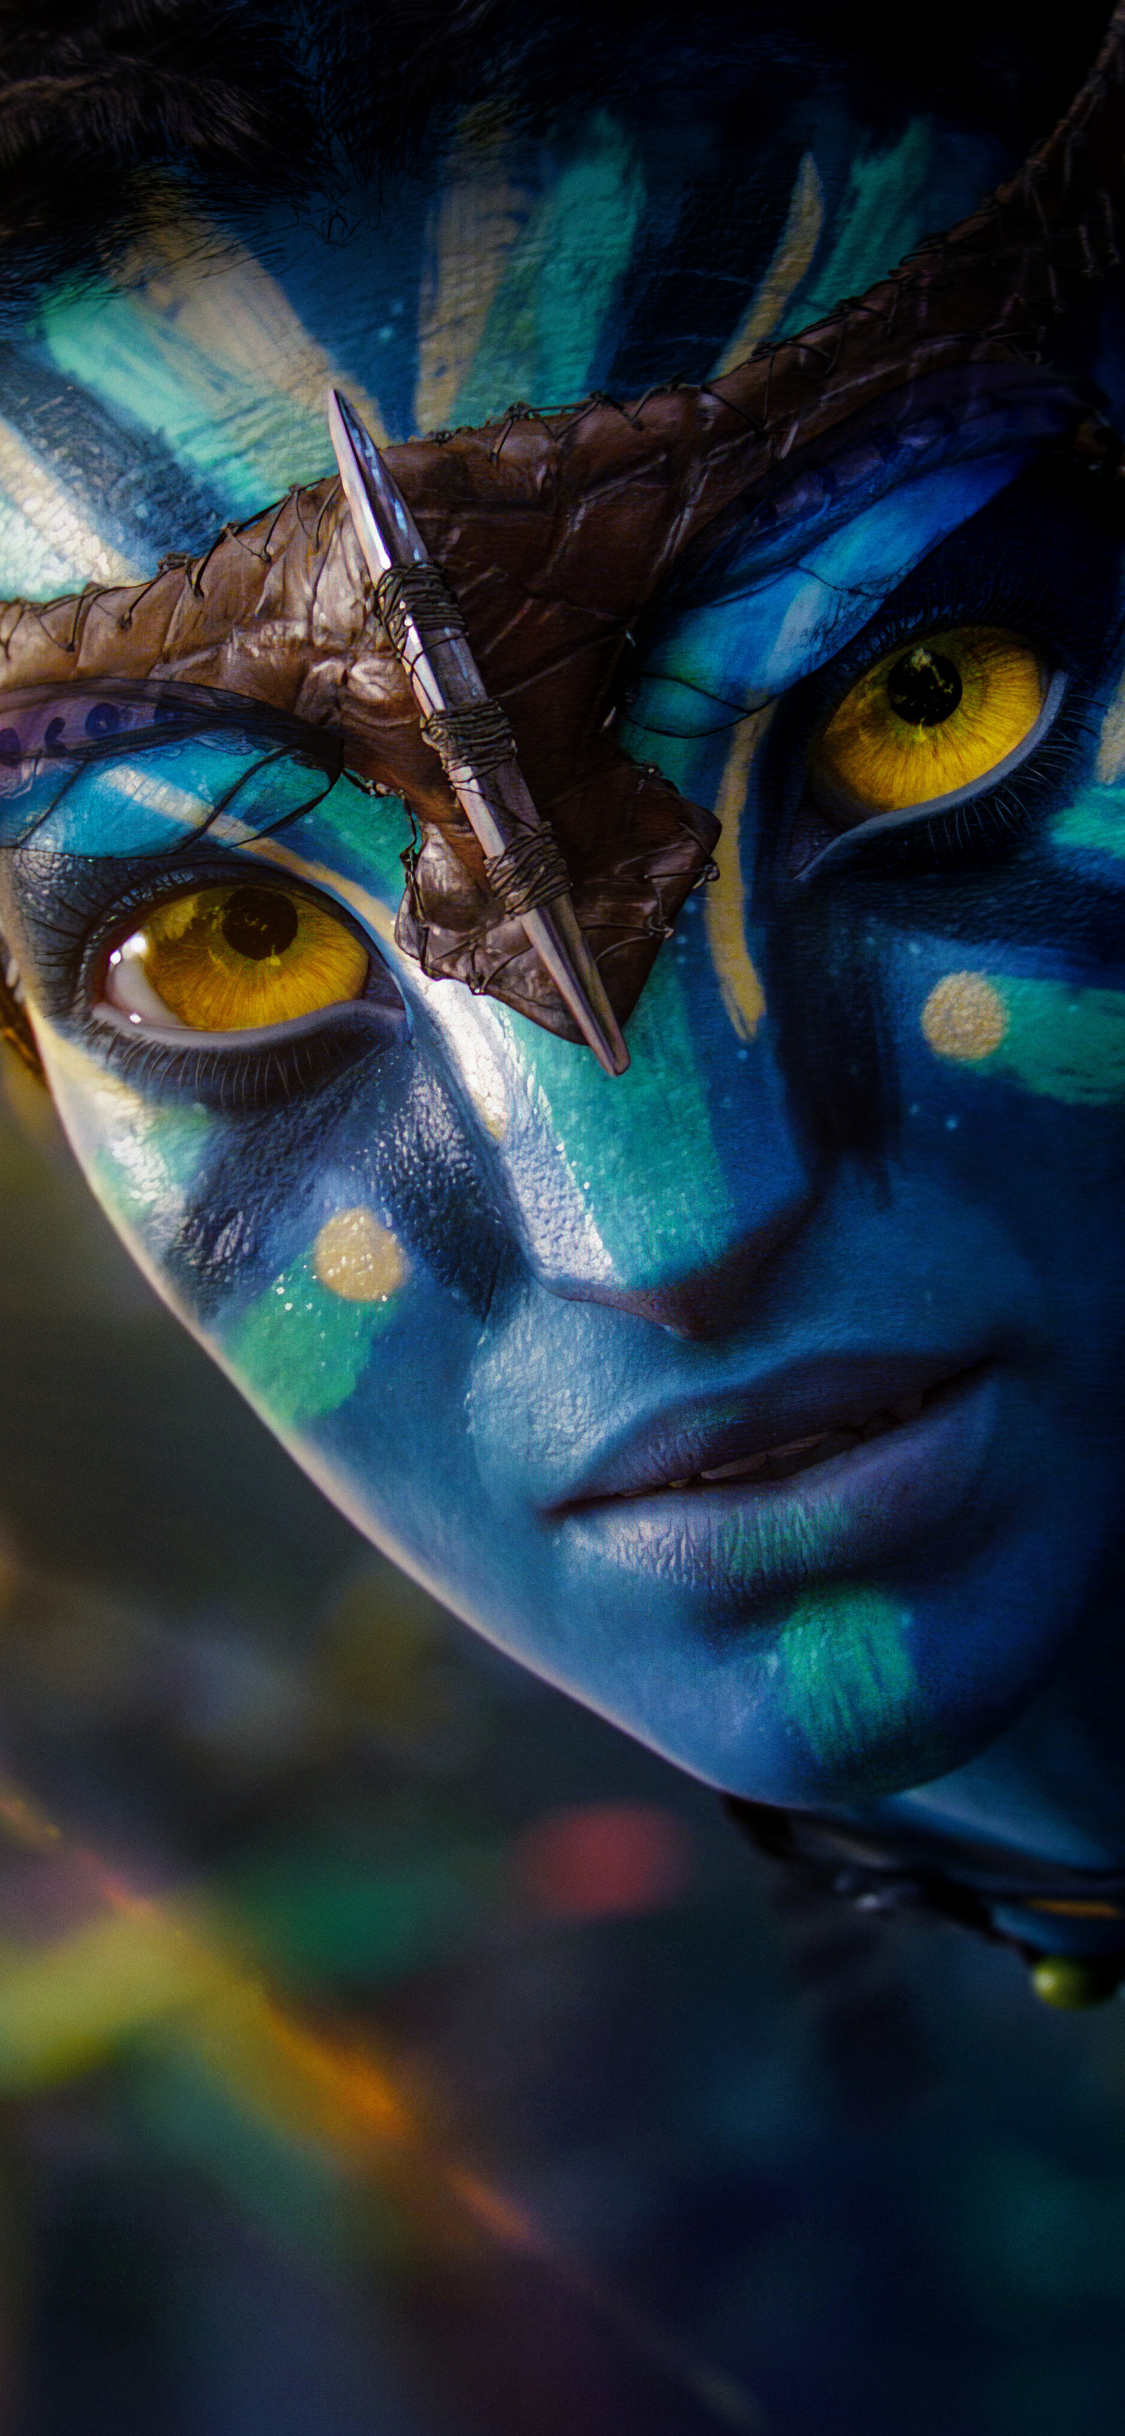 Avatar 2 The Way of Water 8K wallpaper download